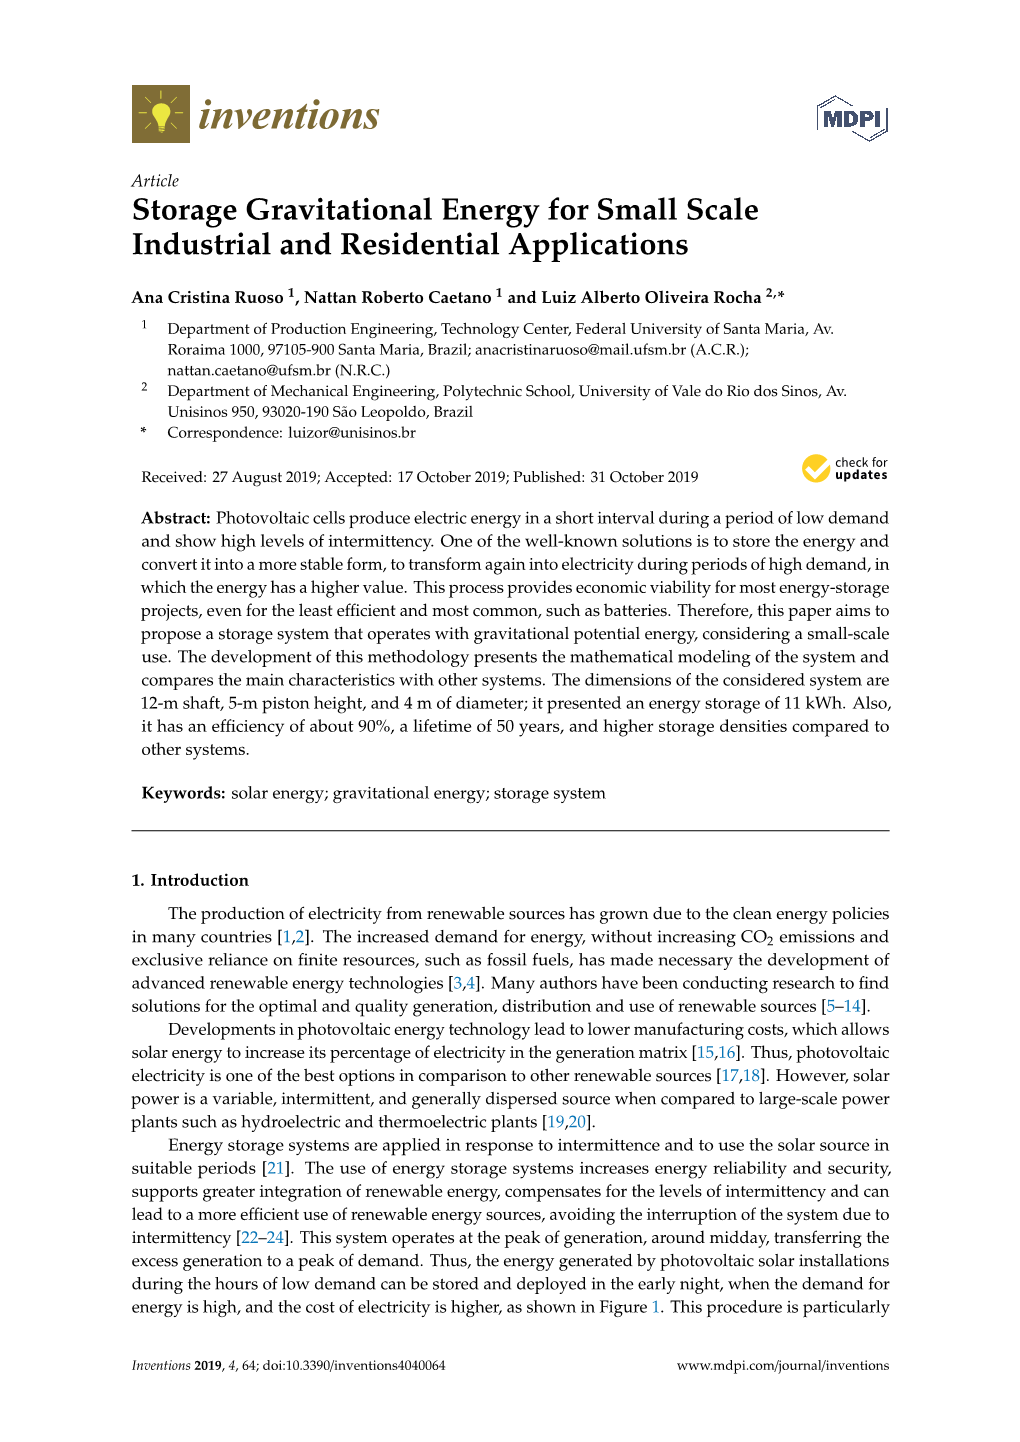 Storage Gravitational Energy for Small Scale Industrial and Residential Applications